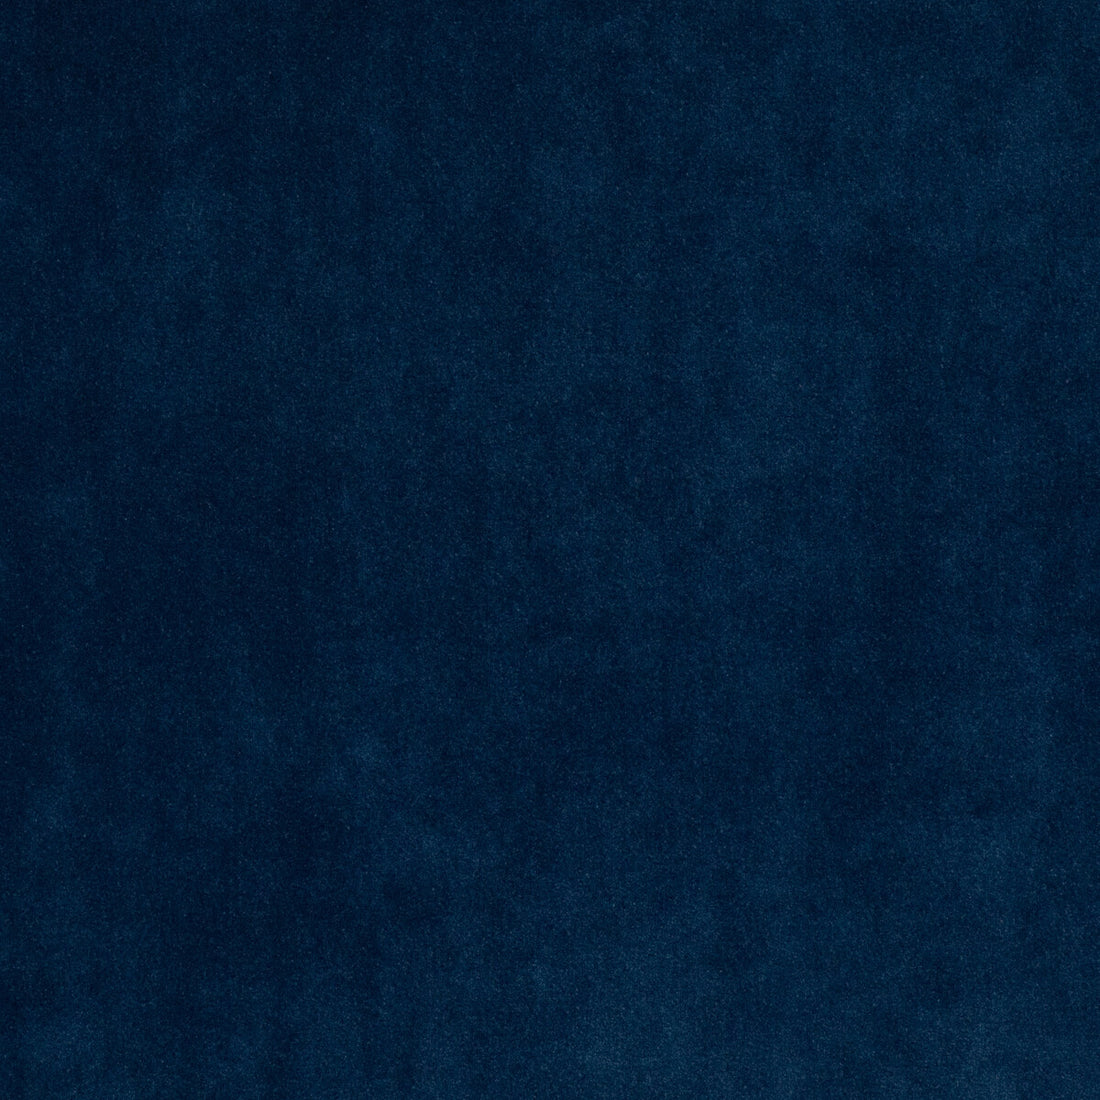 Lyla Velvet fabric in marine color - pattern 35825.655.0 - by Kravet Contract in the Riviera Velvet collection